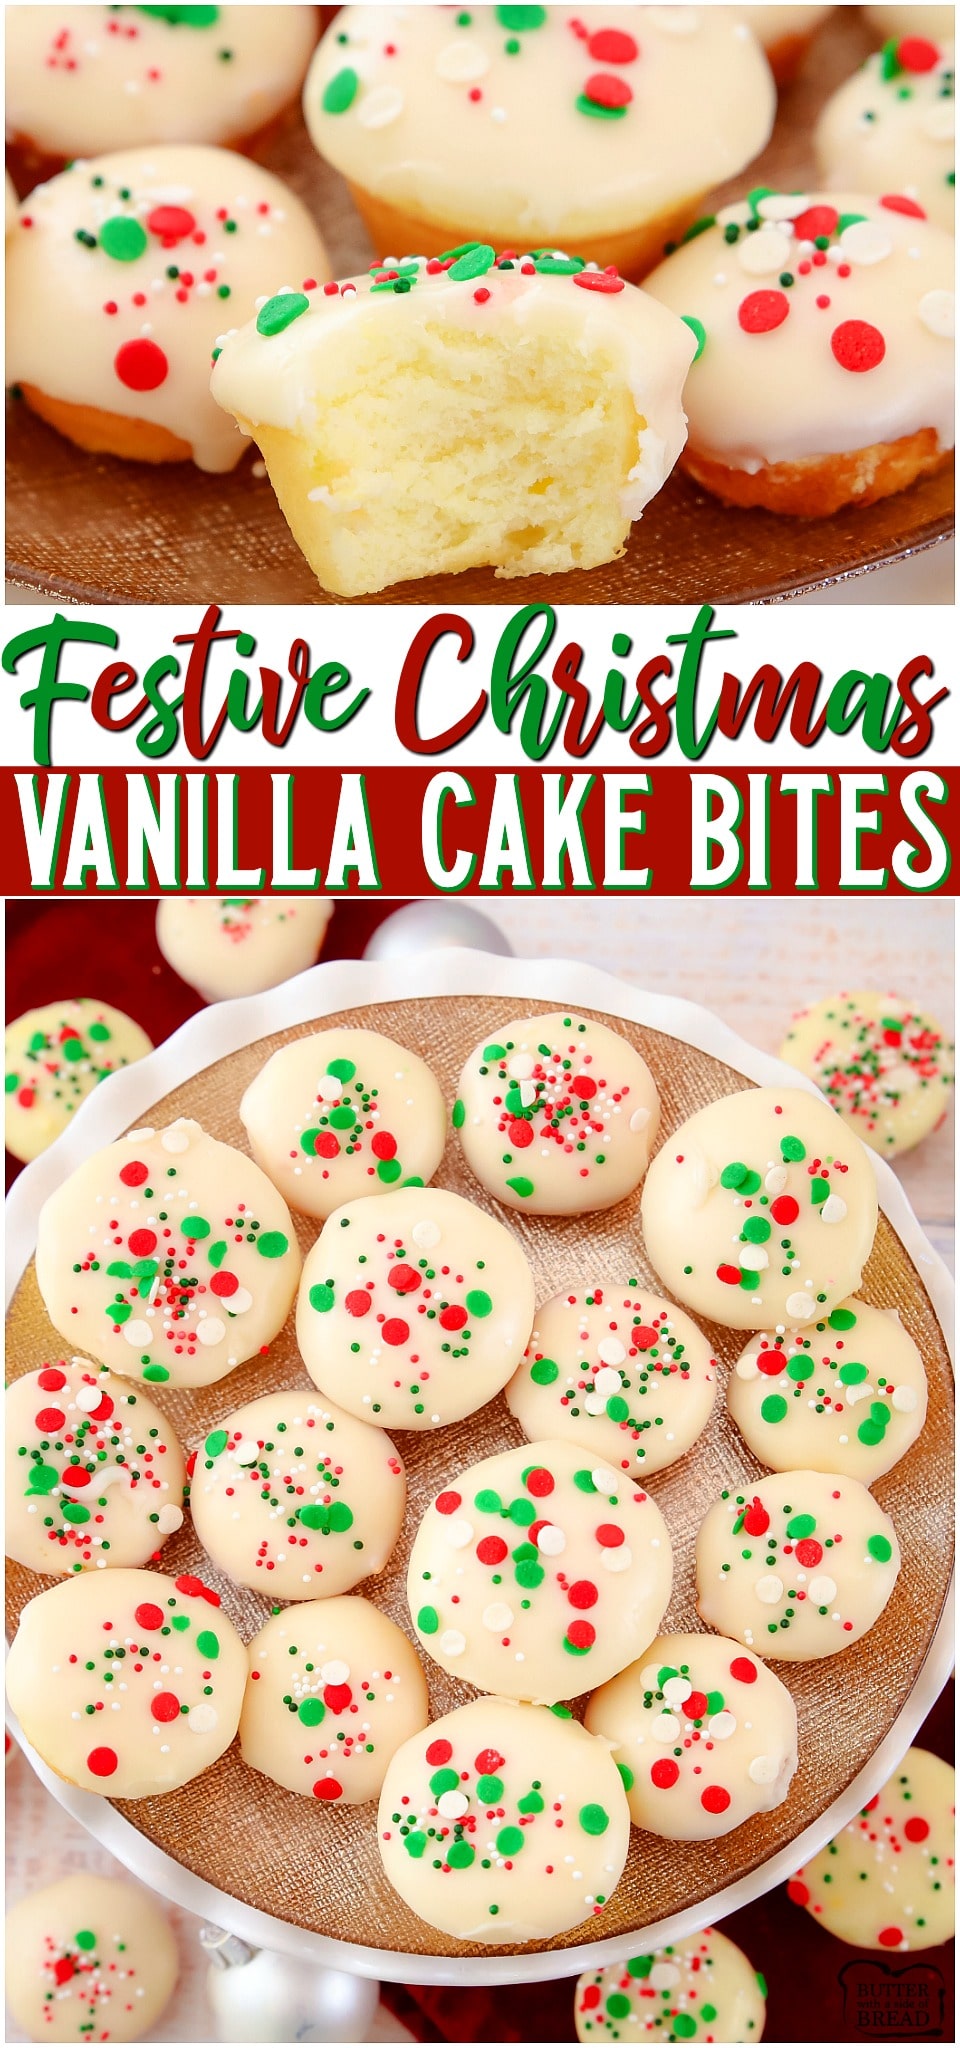 Easy Vanilla Cake Bites are simple glazed bite-sized treats that are so easy to make! Super cute & beyond tasty, these vanilla cake bites will be the hit of the party! These cute, festive treats are perfect for Christmas!